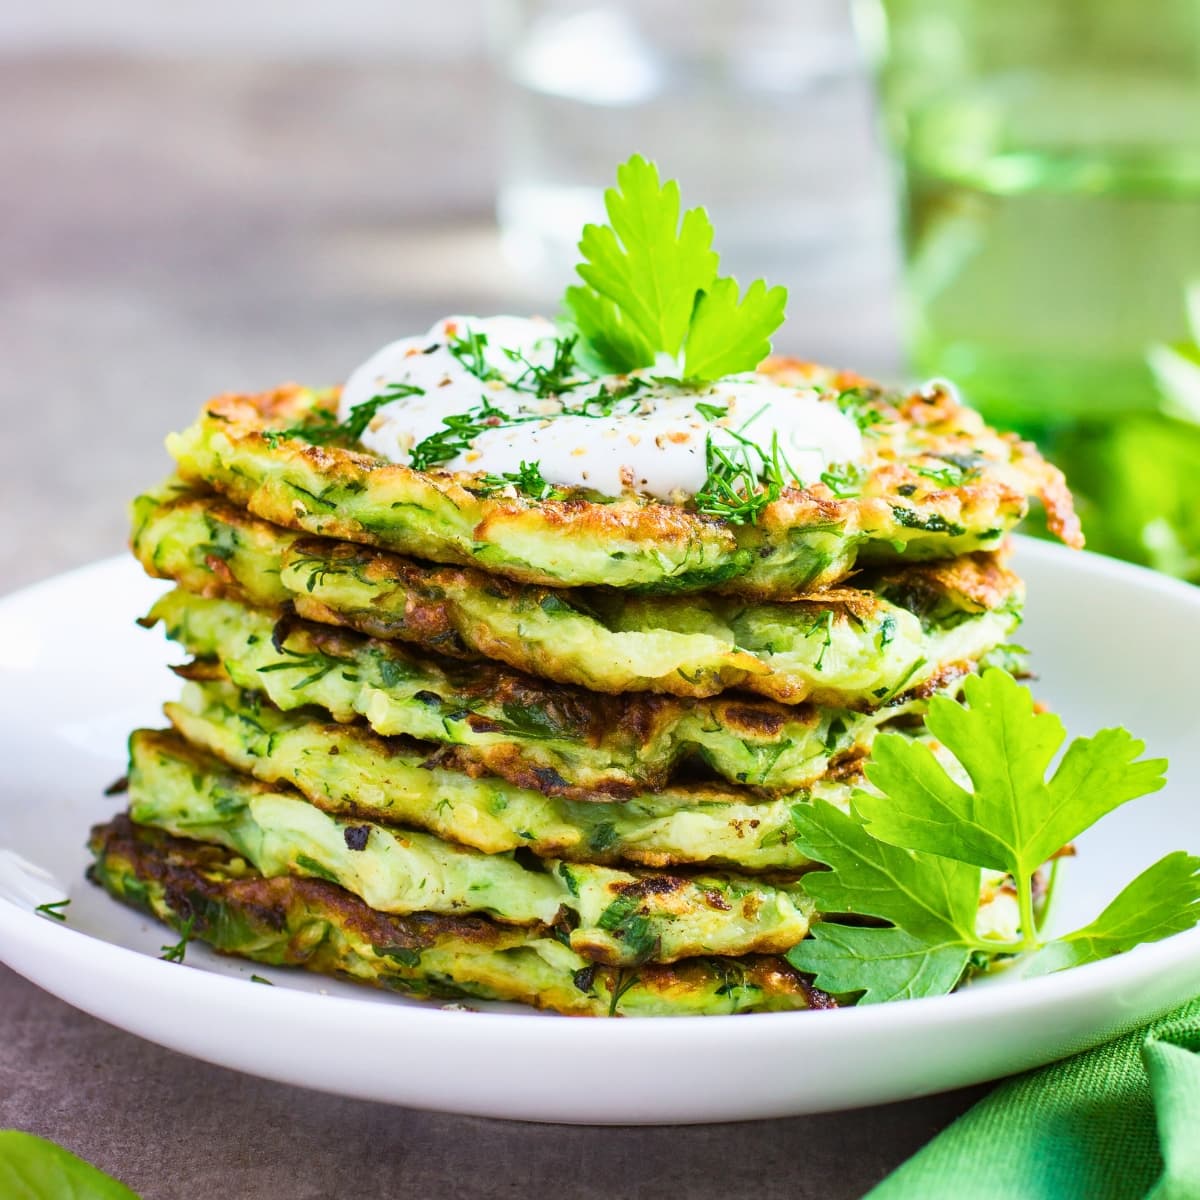 Stacks of zucchini fritters with yogurt on top garnished with dill and parsley leaves.
